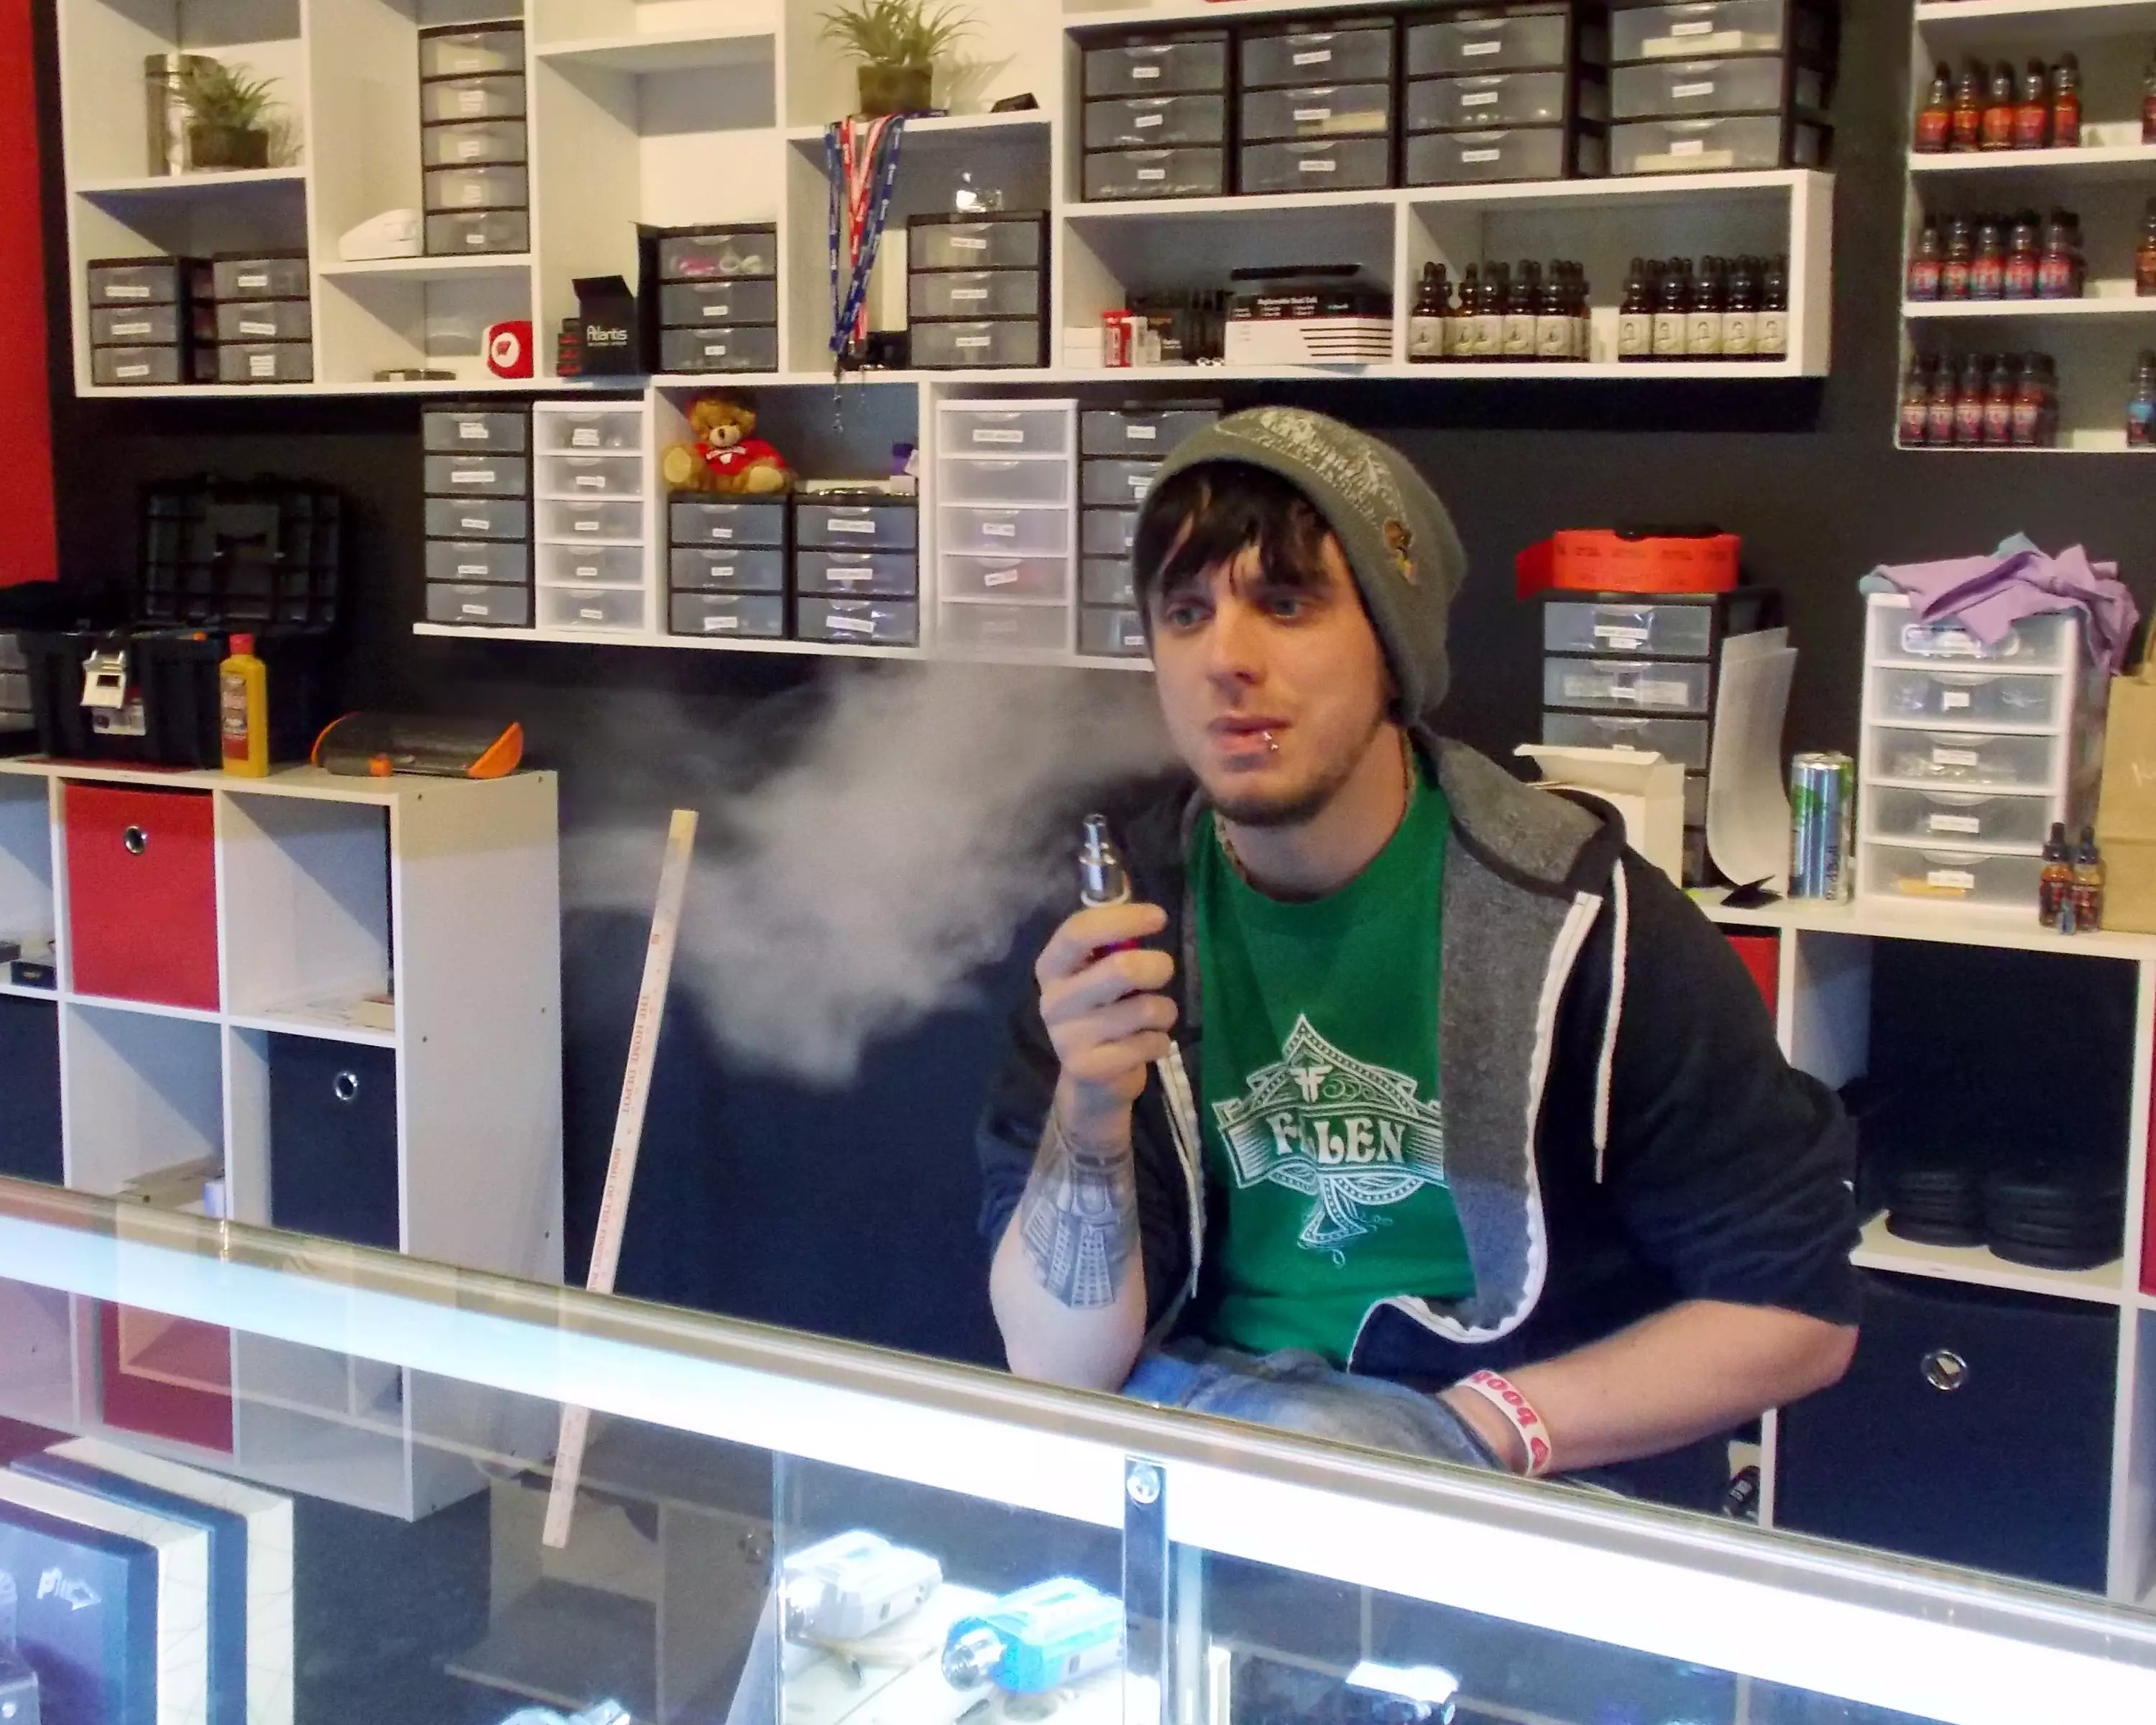 Does This Show Vaping IS Better For You Than Smoking?